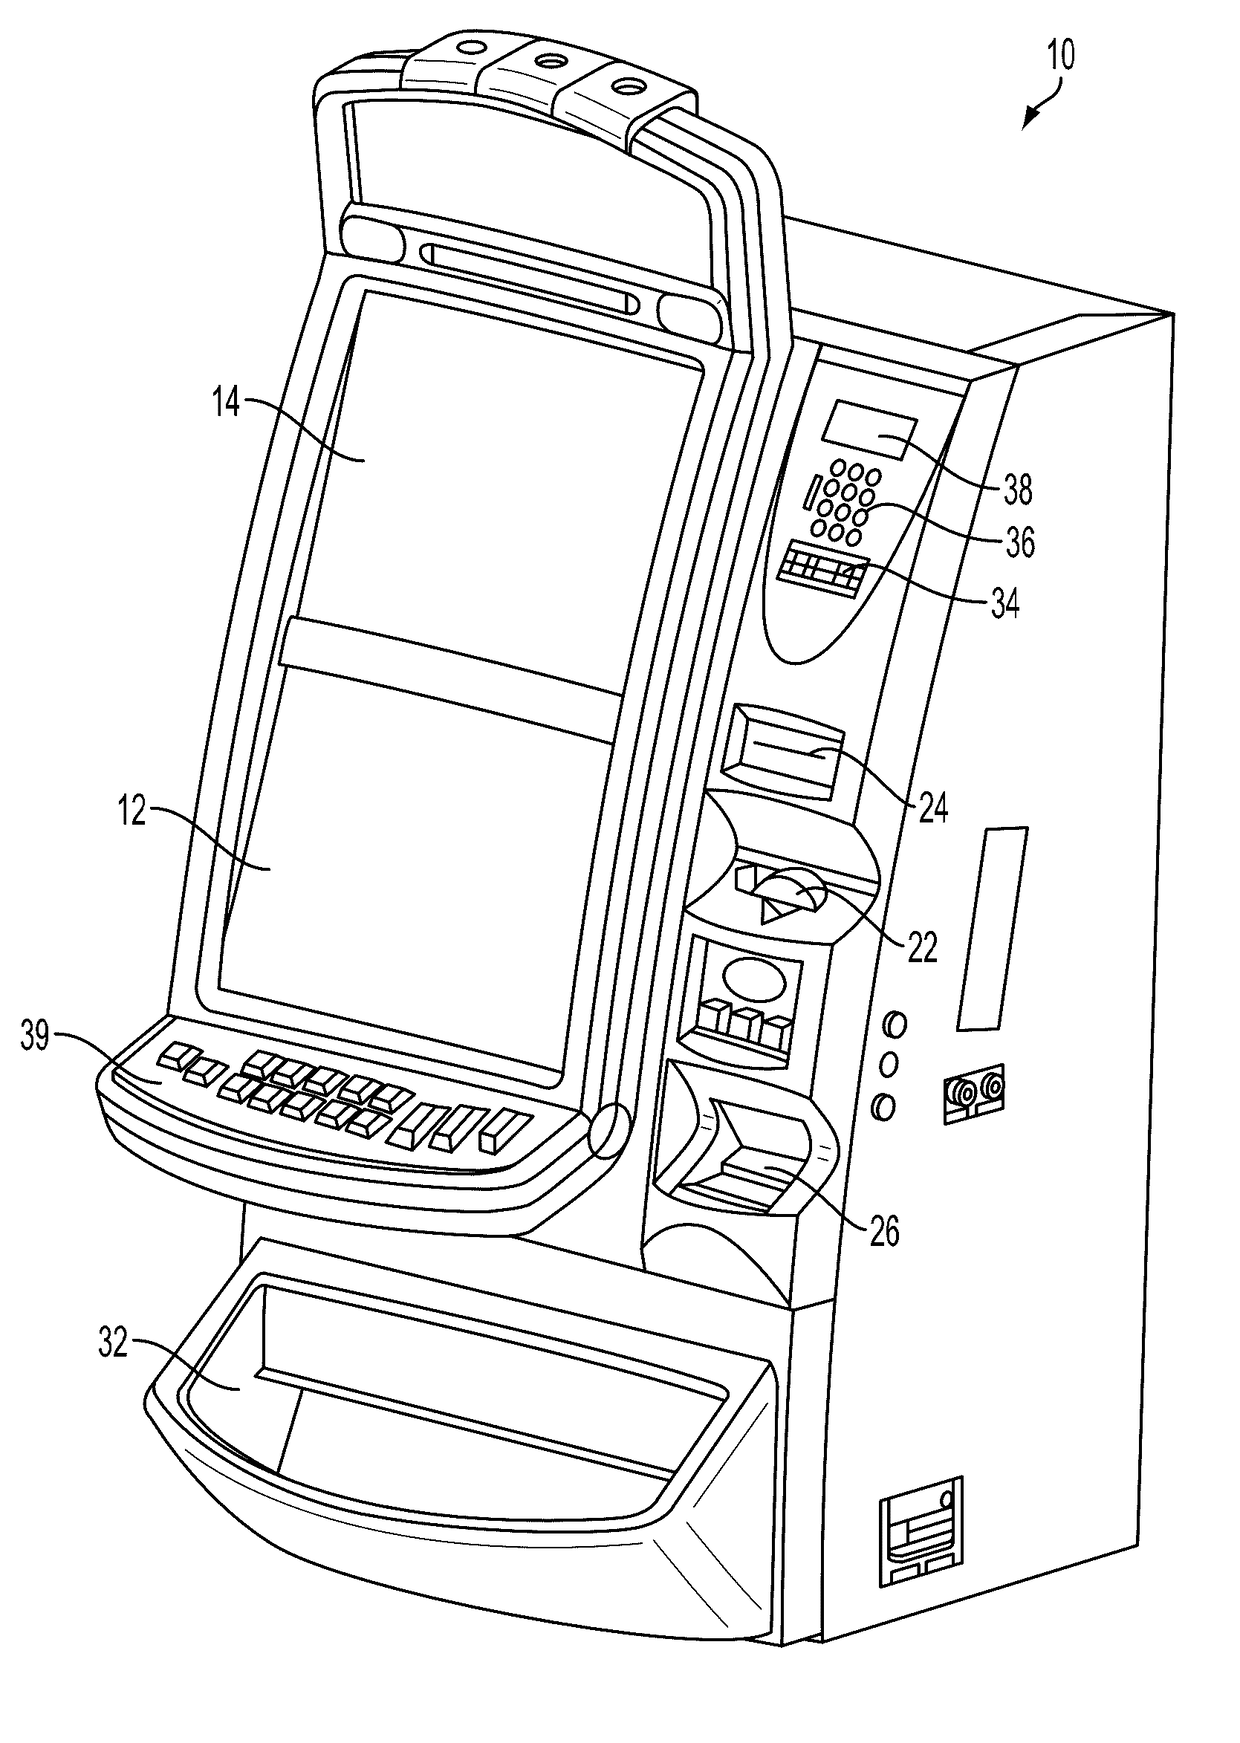 Enhanced electronic gaming machine with x-ray vision display